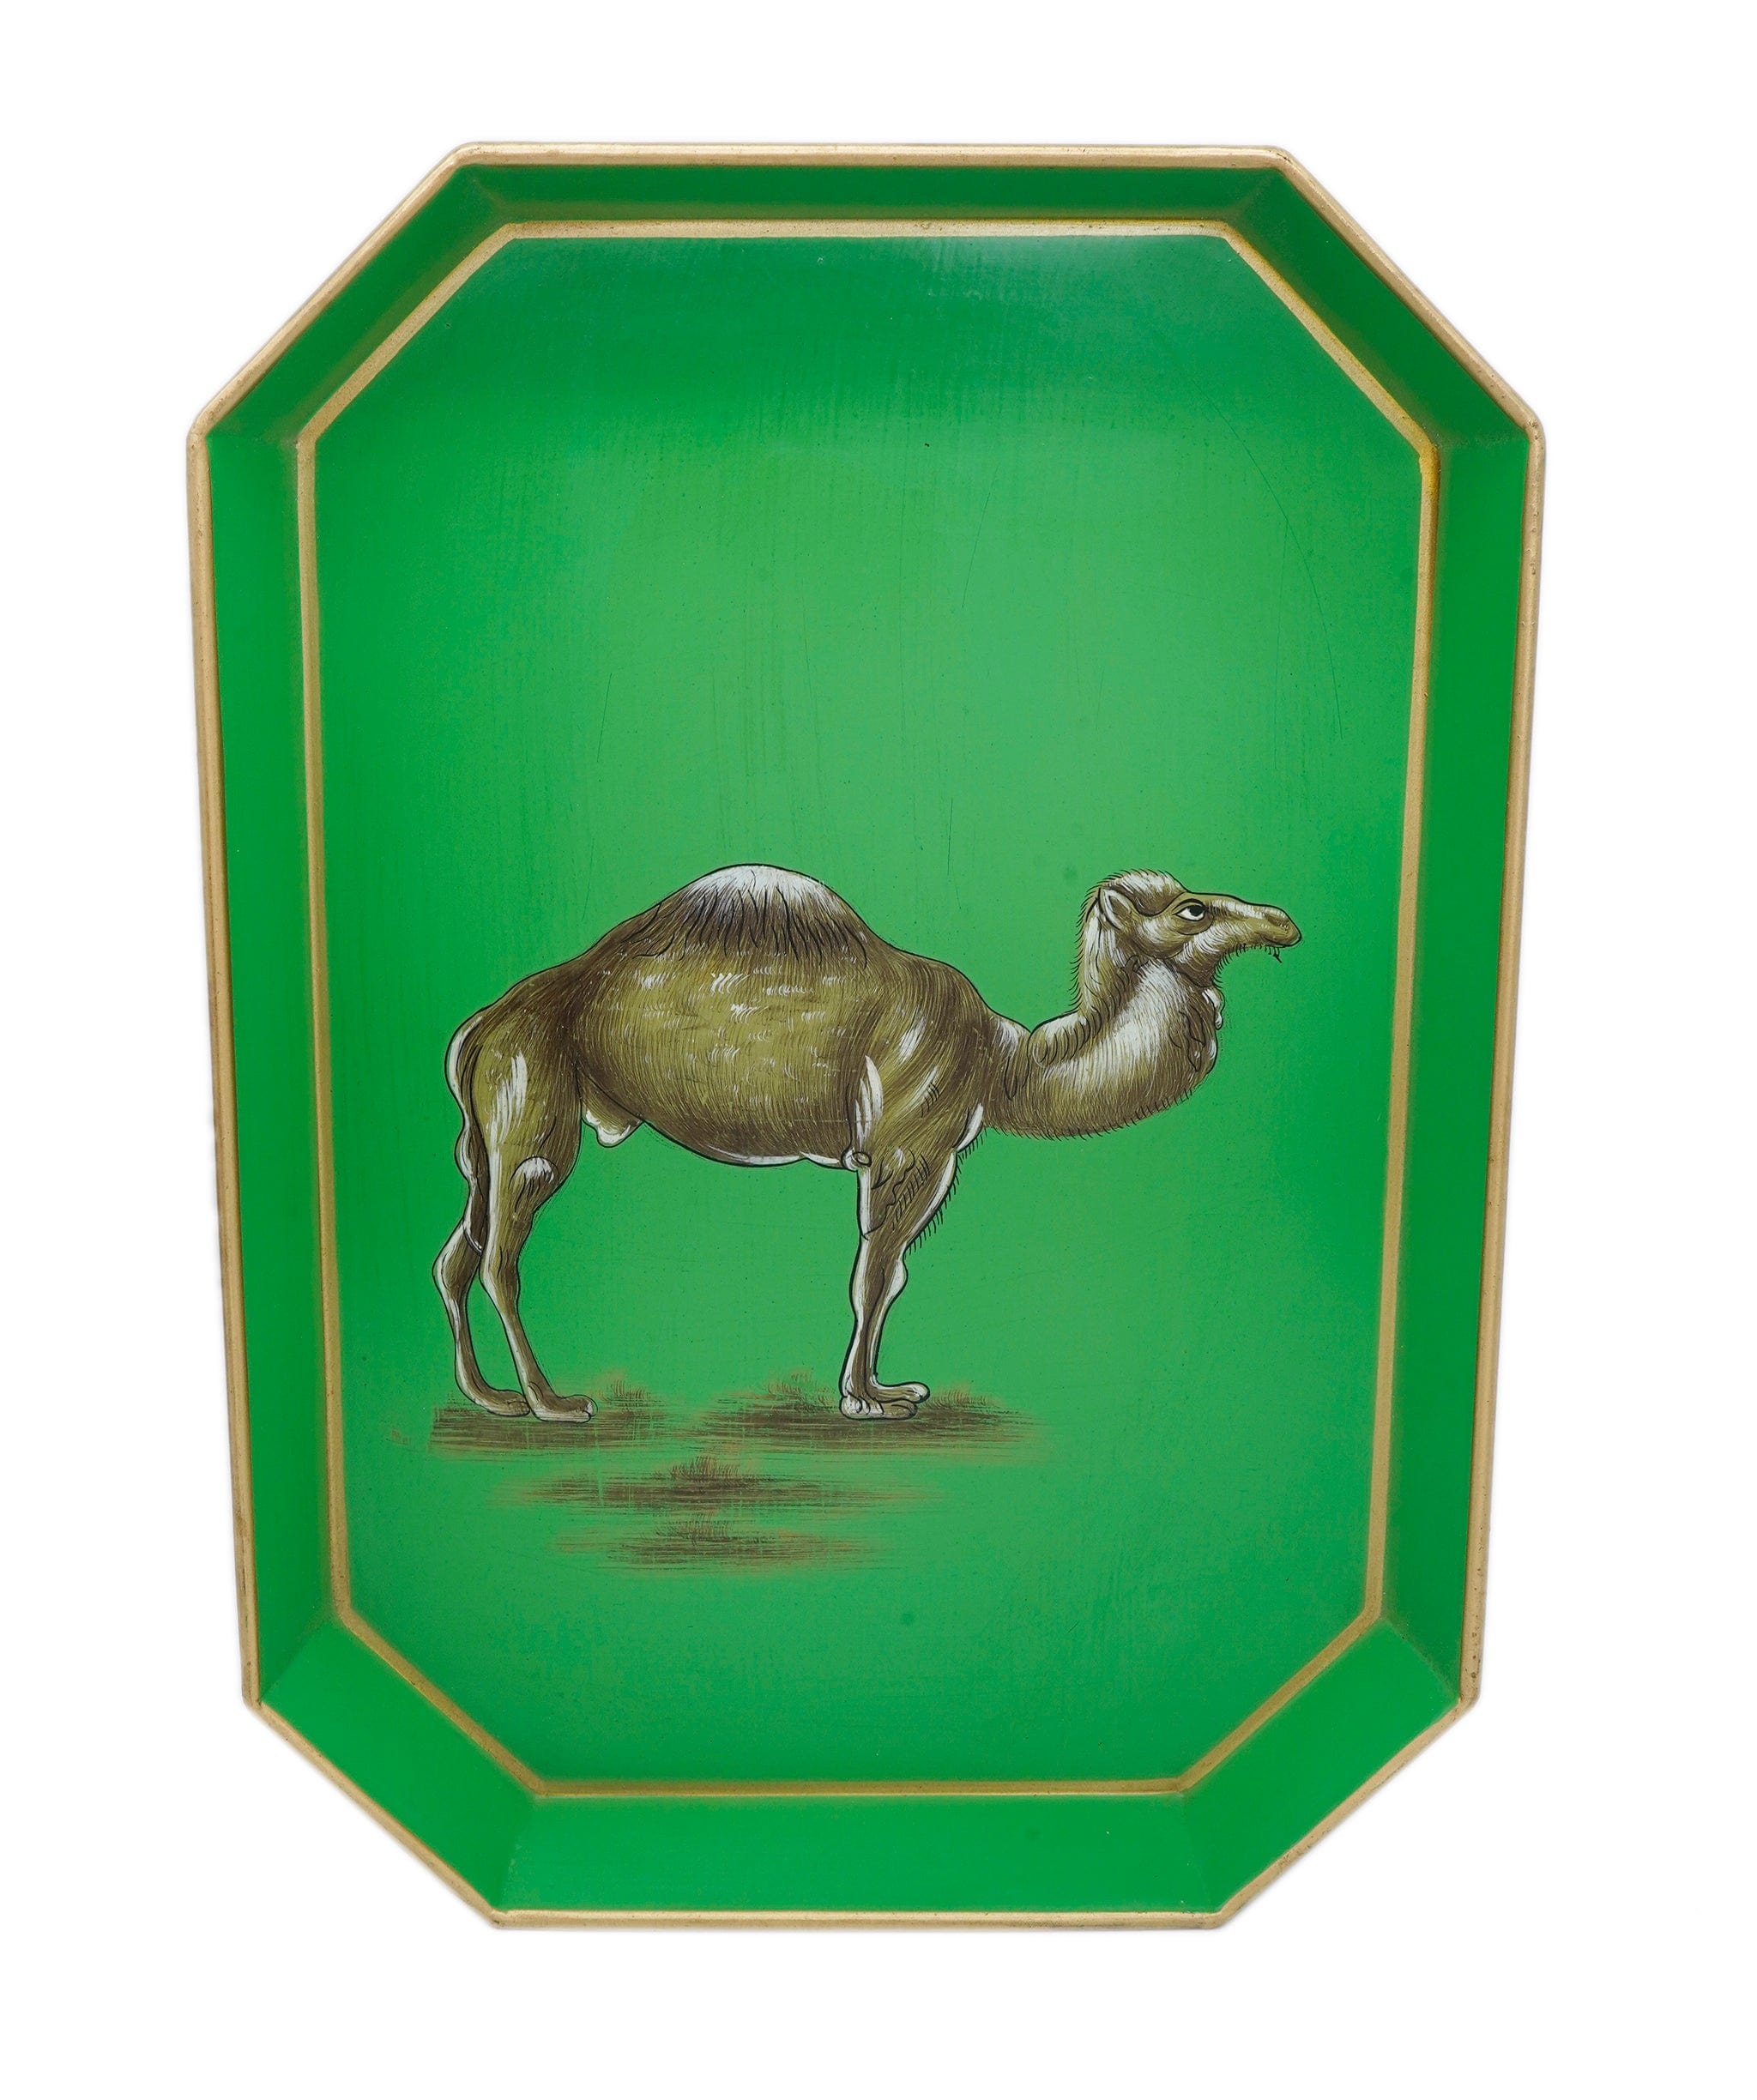 Luxury Promise Les Ottomans Camel hand-painted metal tray ASL9659